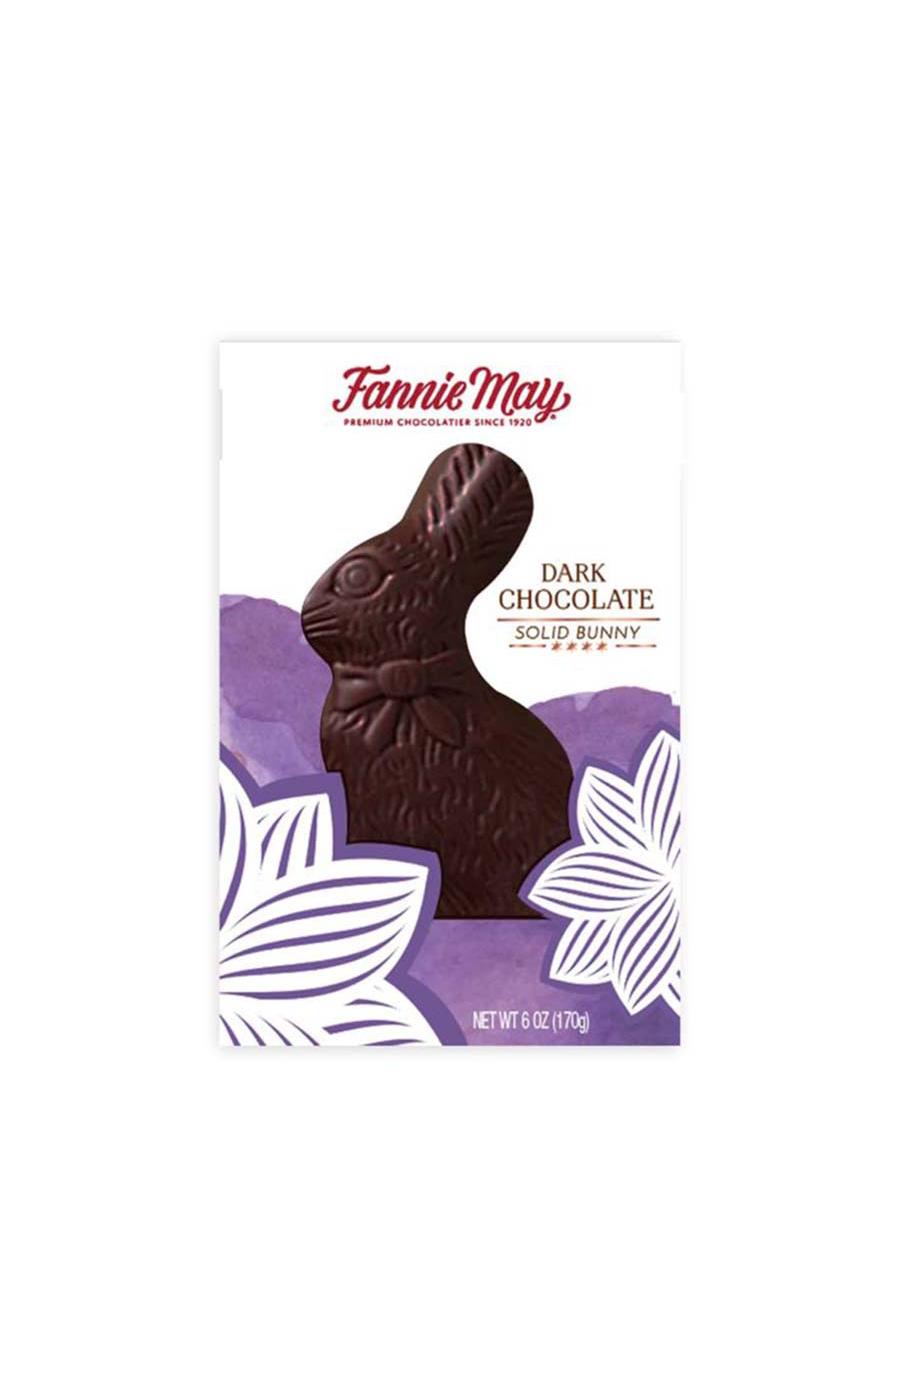 Fannie May Dark Chocolate Solid Bunny Easter Candy; image 1 of 3